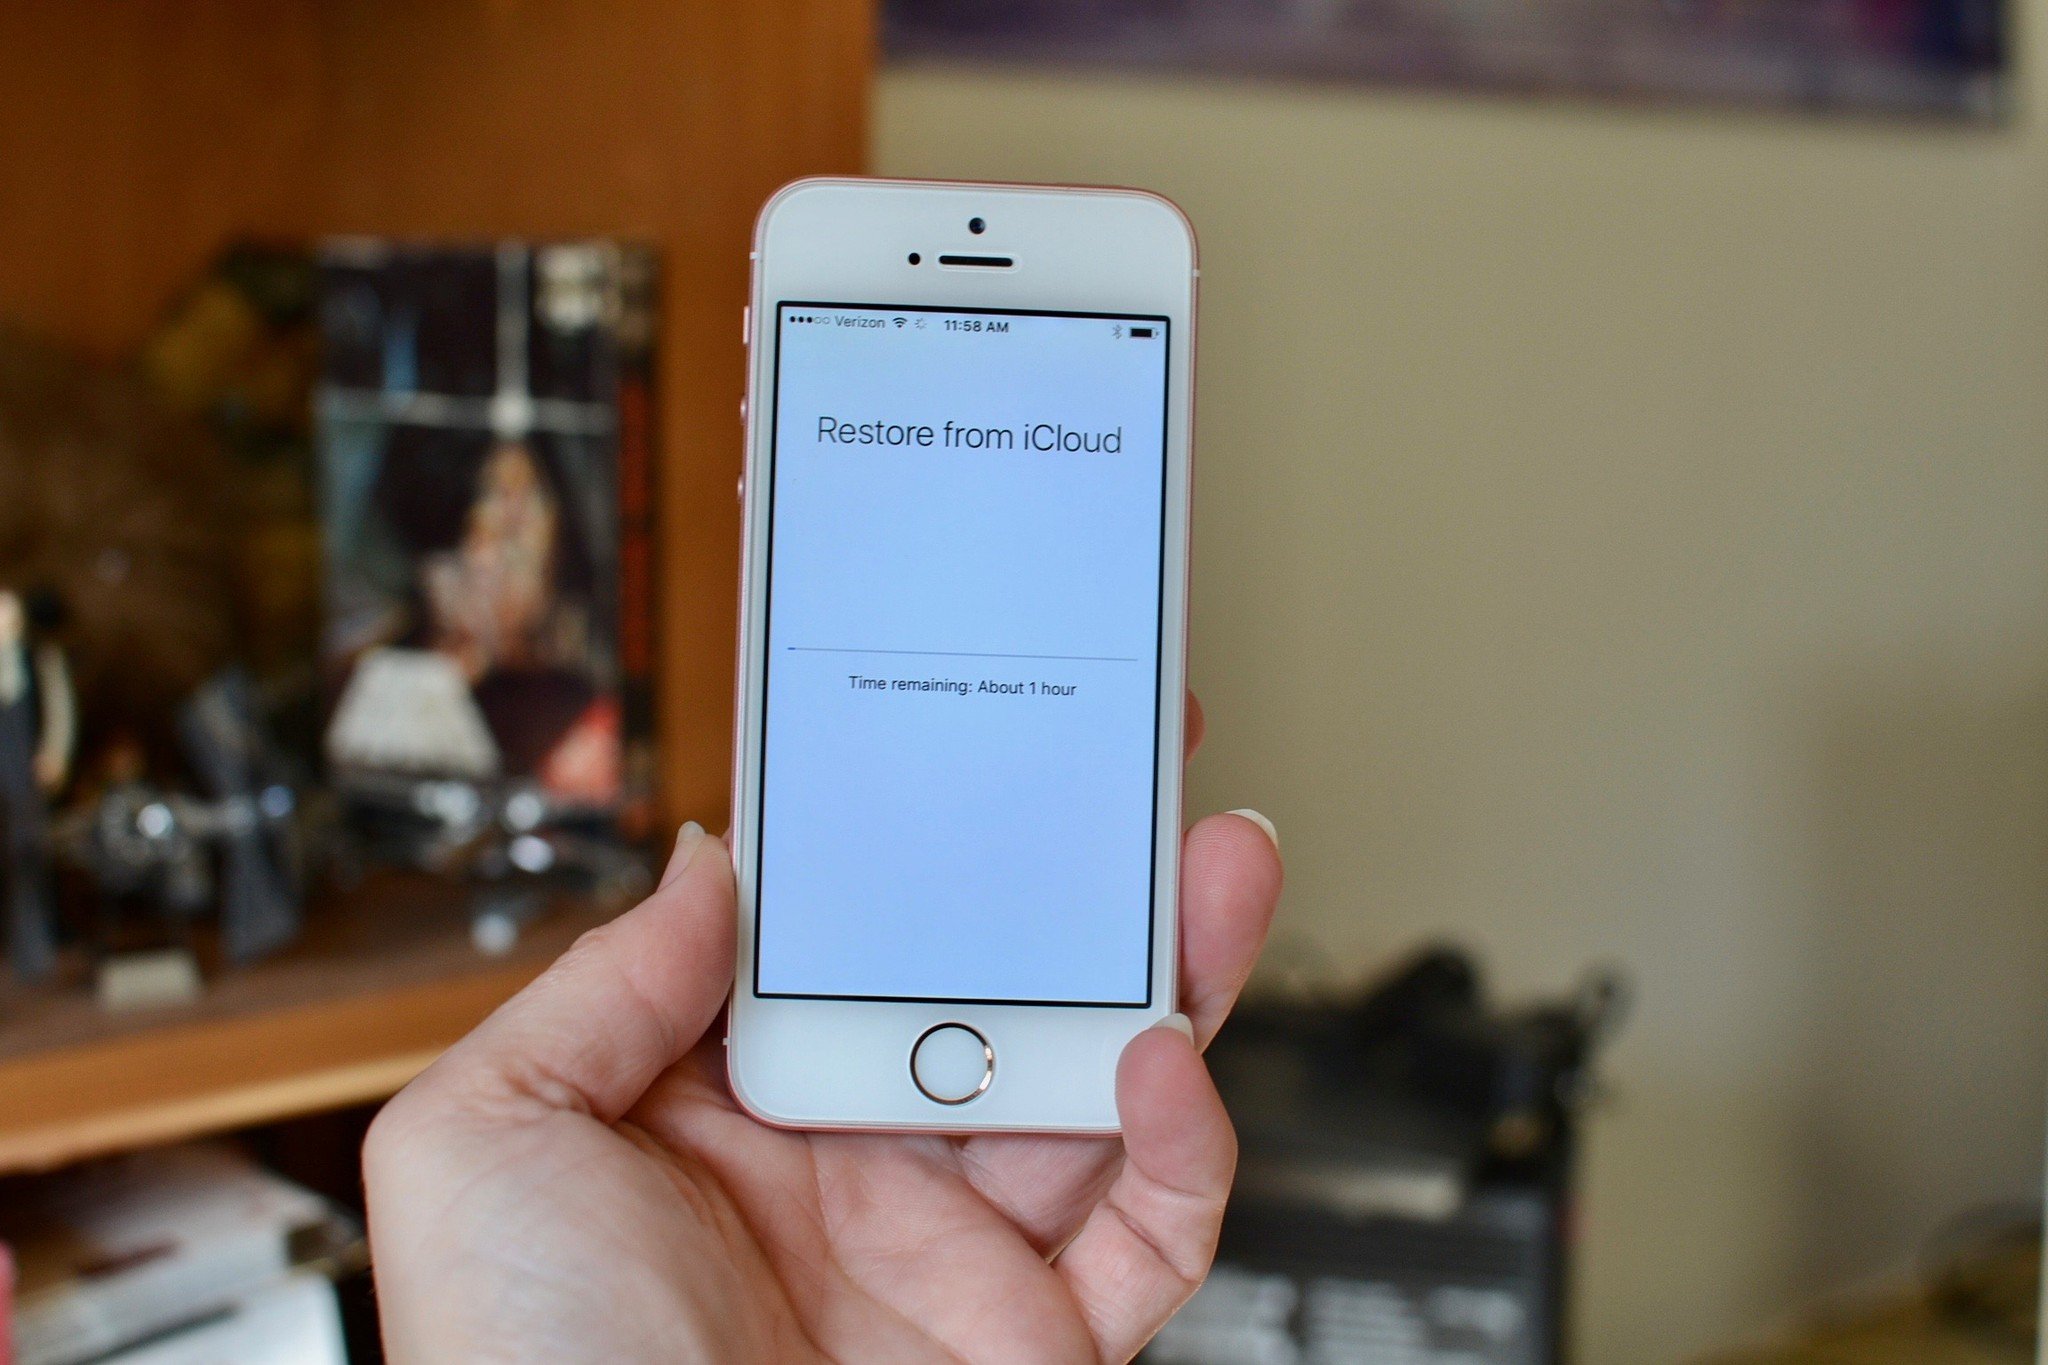 Restoring from iCloud on iPhone